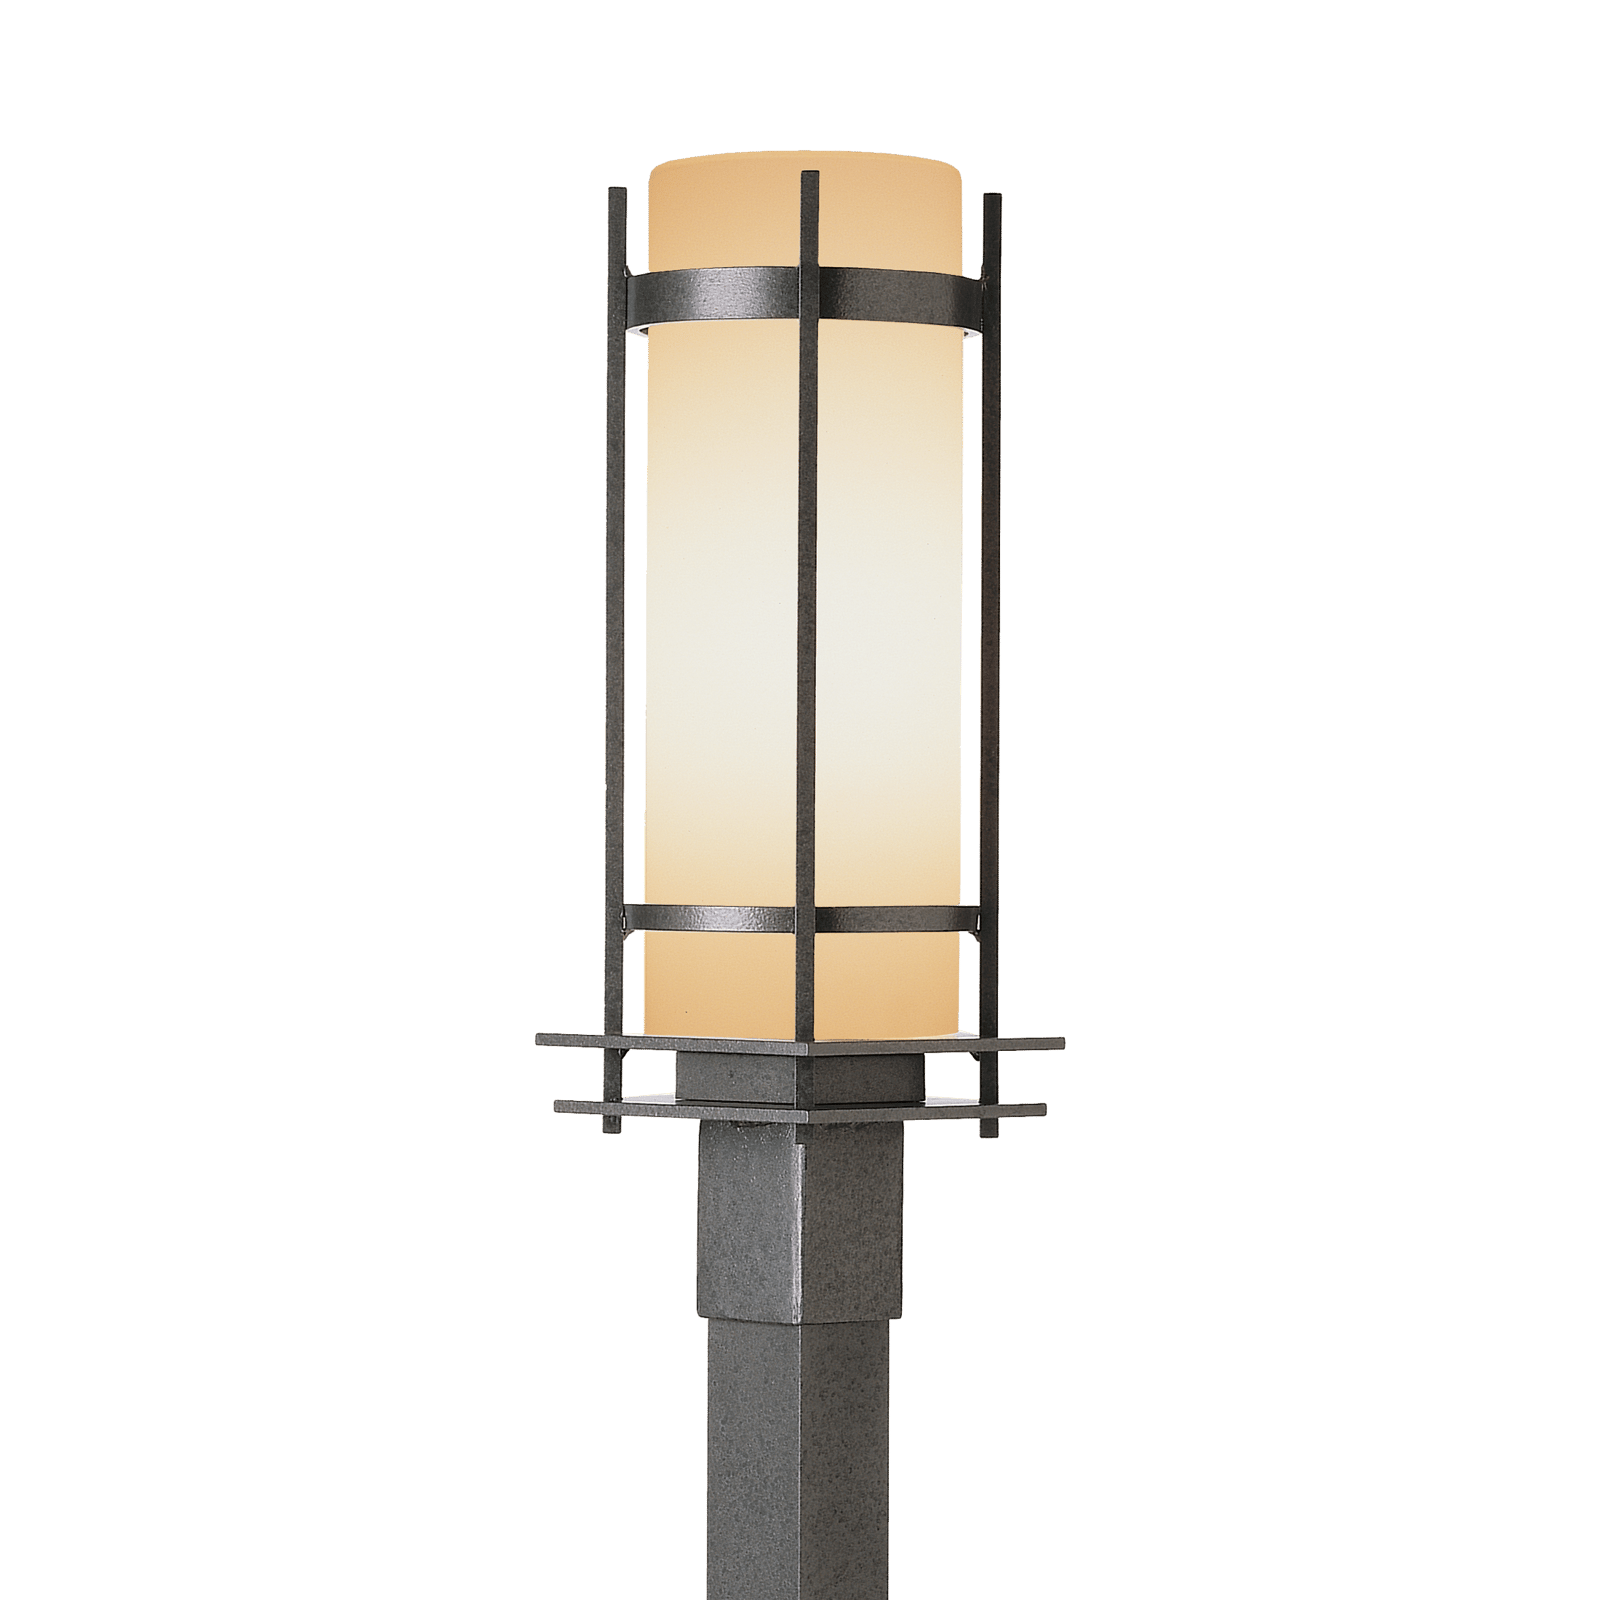 Hubbardton Forge Banded Outdoor Post Light Outdoor l Post/Pier Mounts Hubbardton Forge Coastal Natural Iron Opal Glass (GG) 